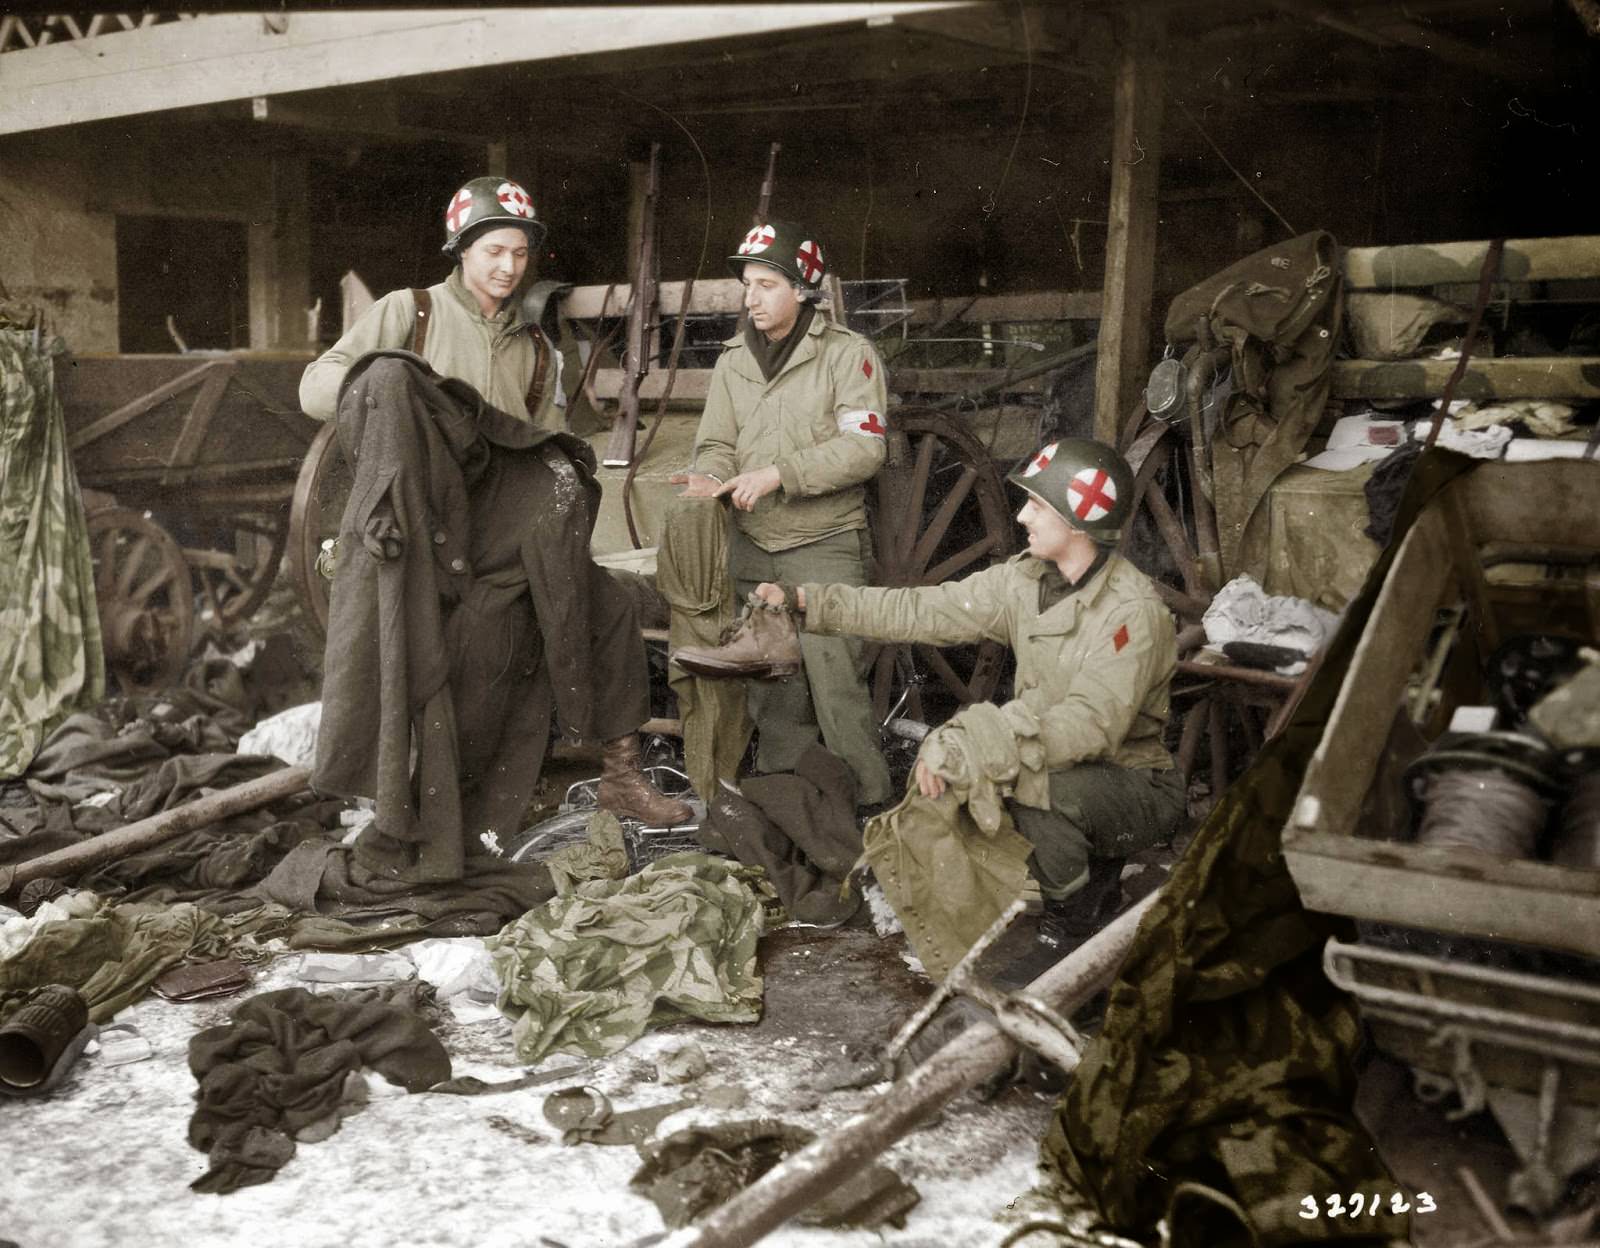 Medics of the US. 5th Infantry Division examining GI clothing found with German-captured equipment after the liberation of the area, near Diekirch in Luxembourg on the 20th of January 1945